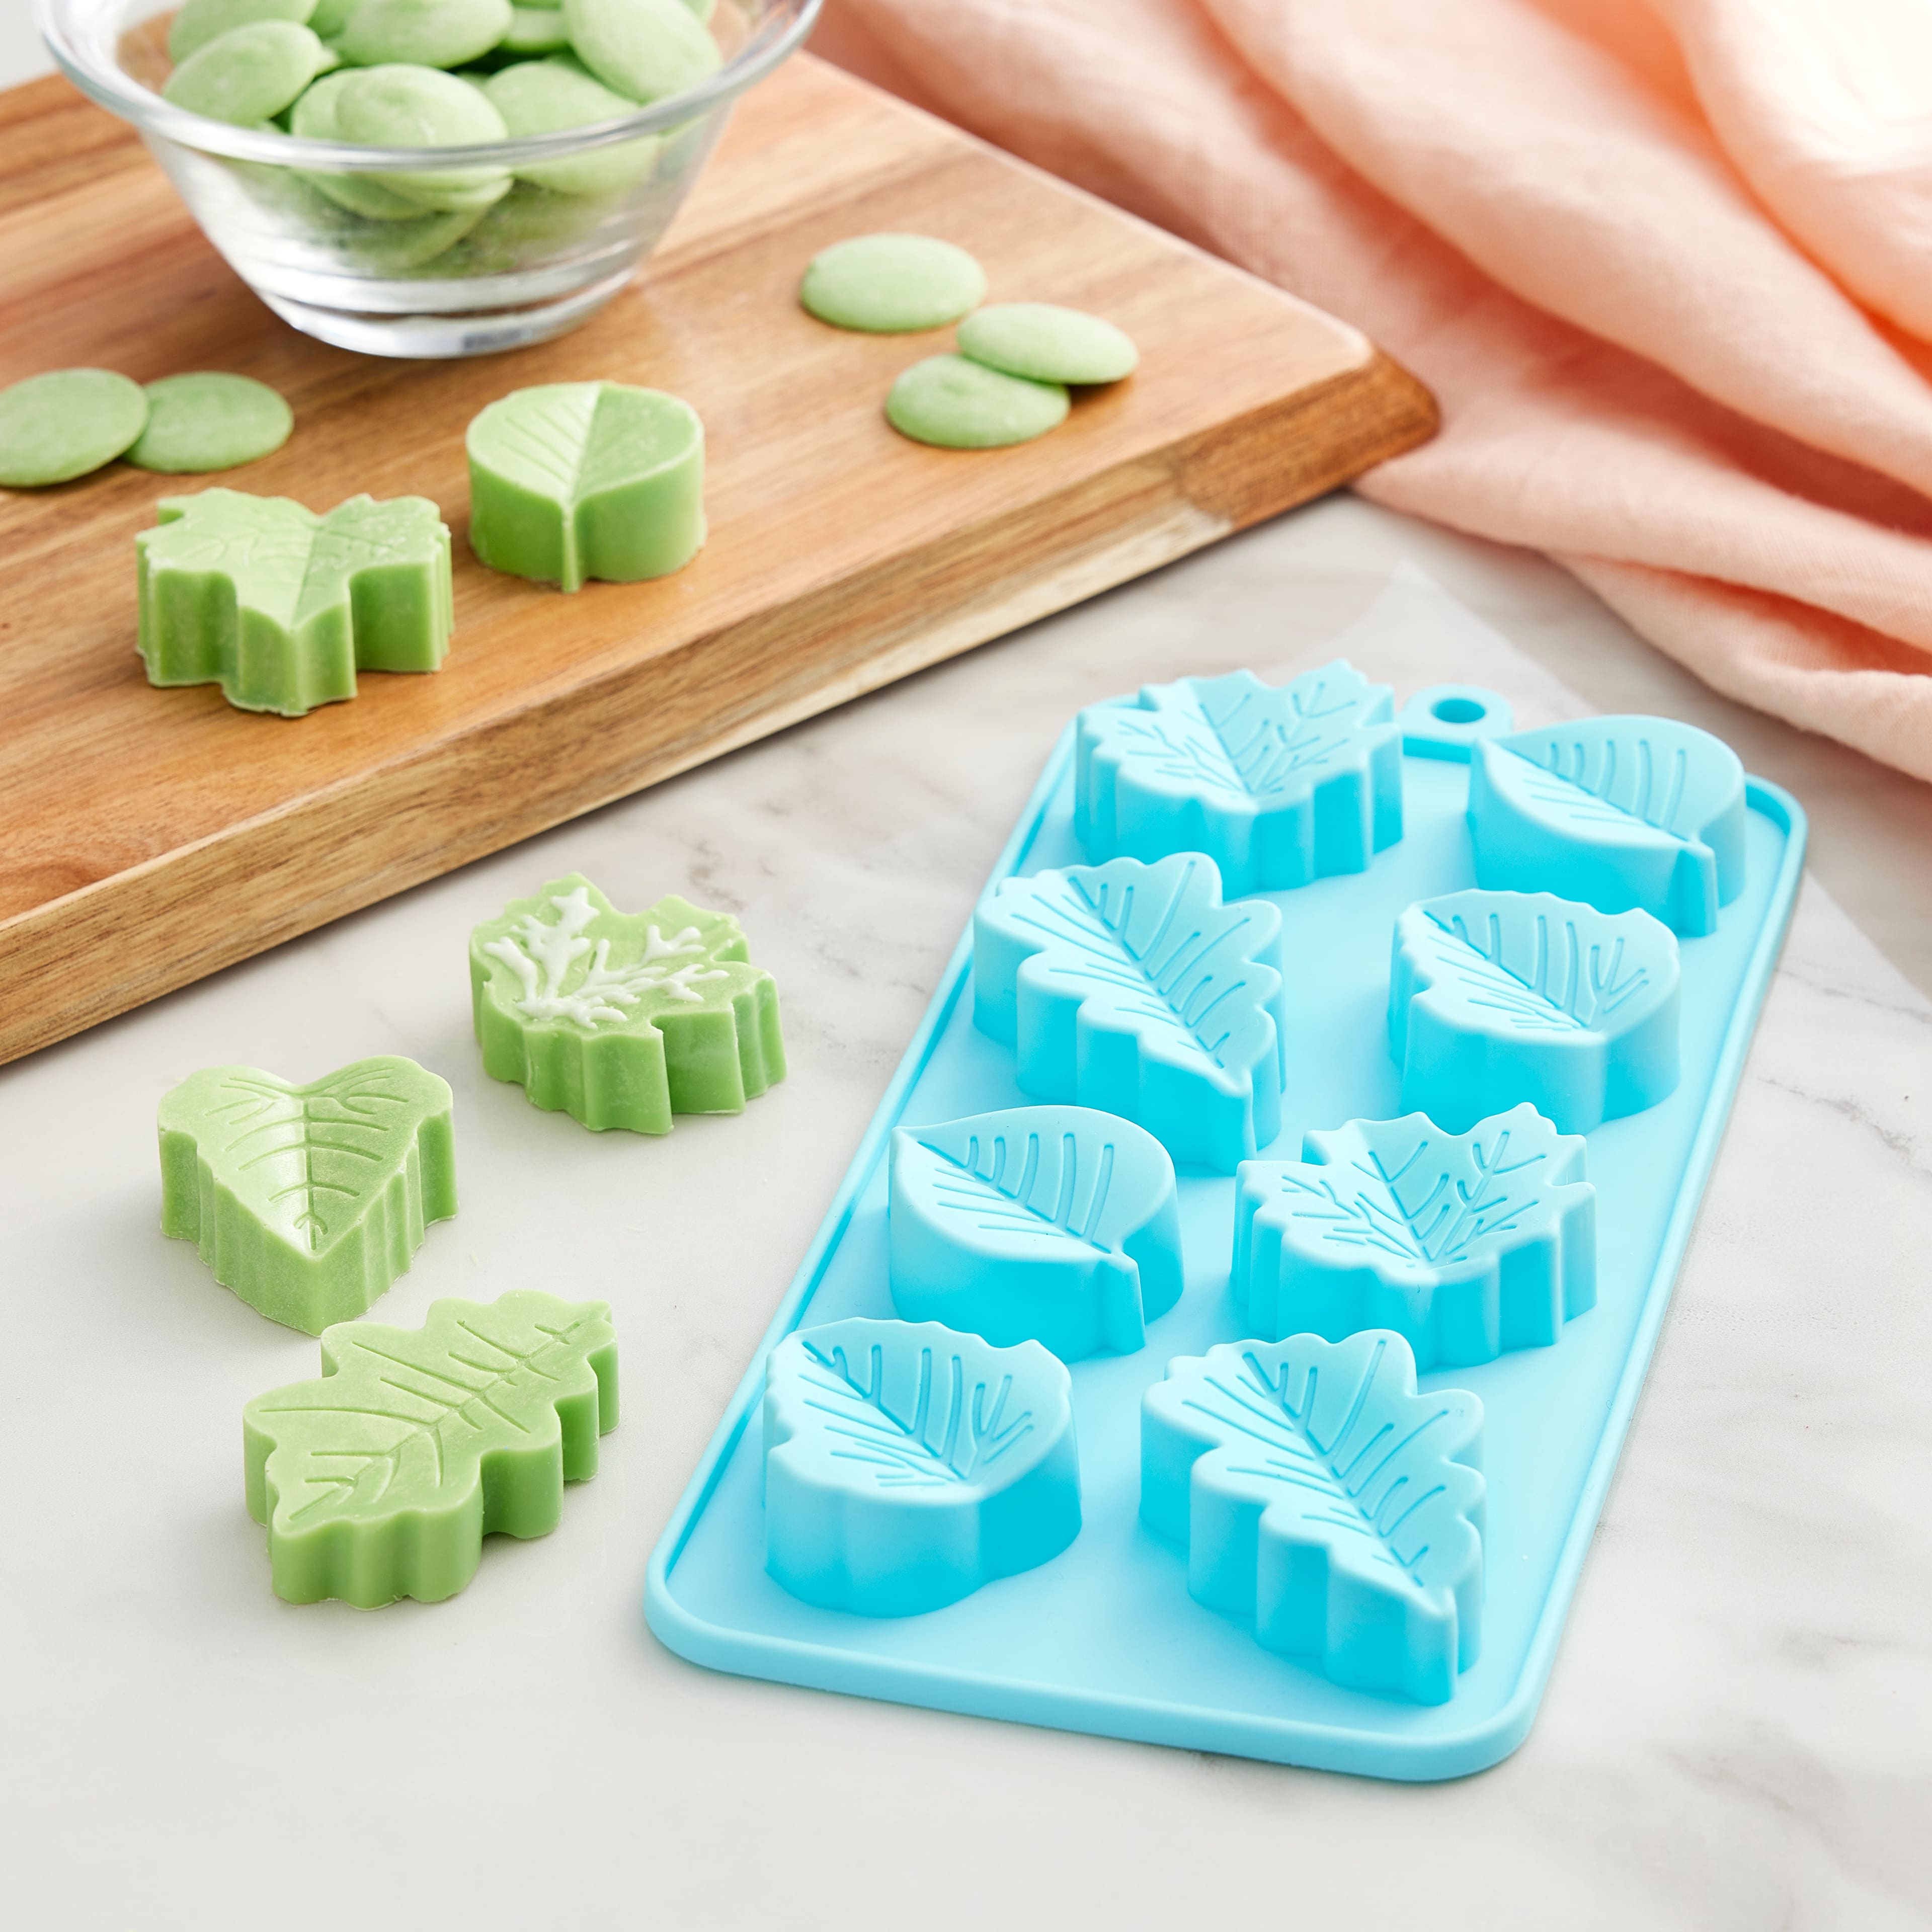 sofliym Mini Leaf Silicone Candy Molds for Chocolate Gummy, Small Leaf Wax  Melts Molds Baking Molds Tiny Ice Cube Tray with Scraper